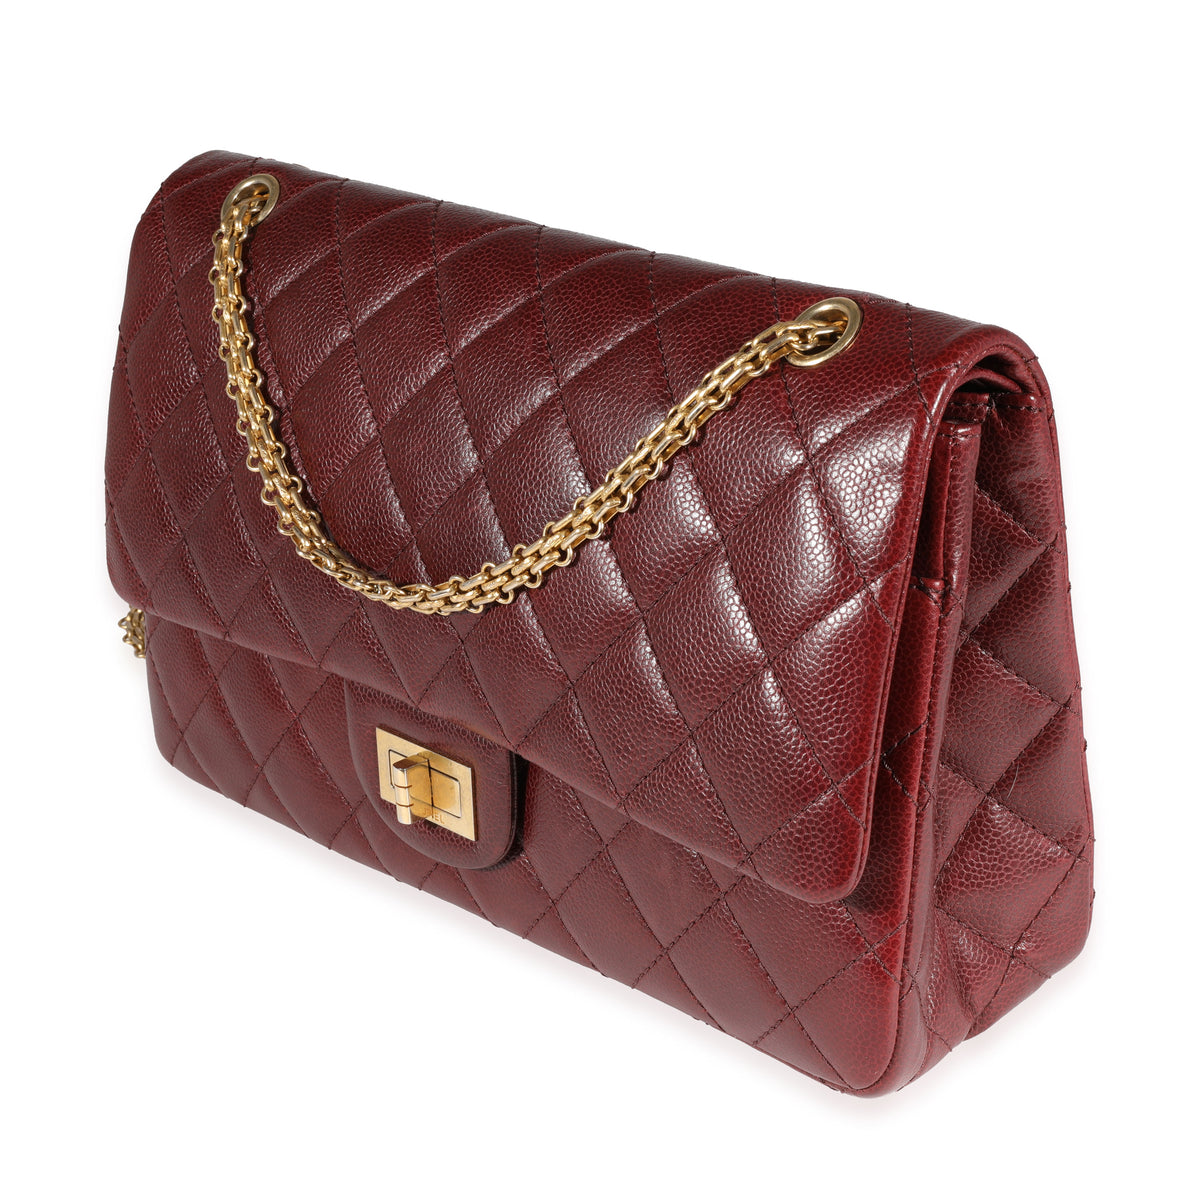 Chanel 2.55 Reissue Double Flap Patent Leather Shoulder Bag Maroon